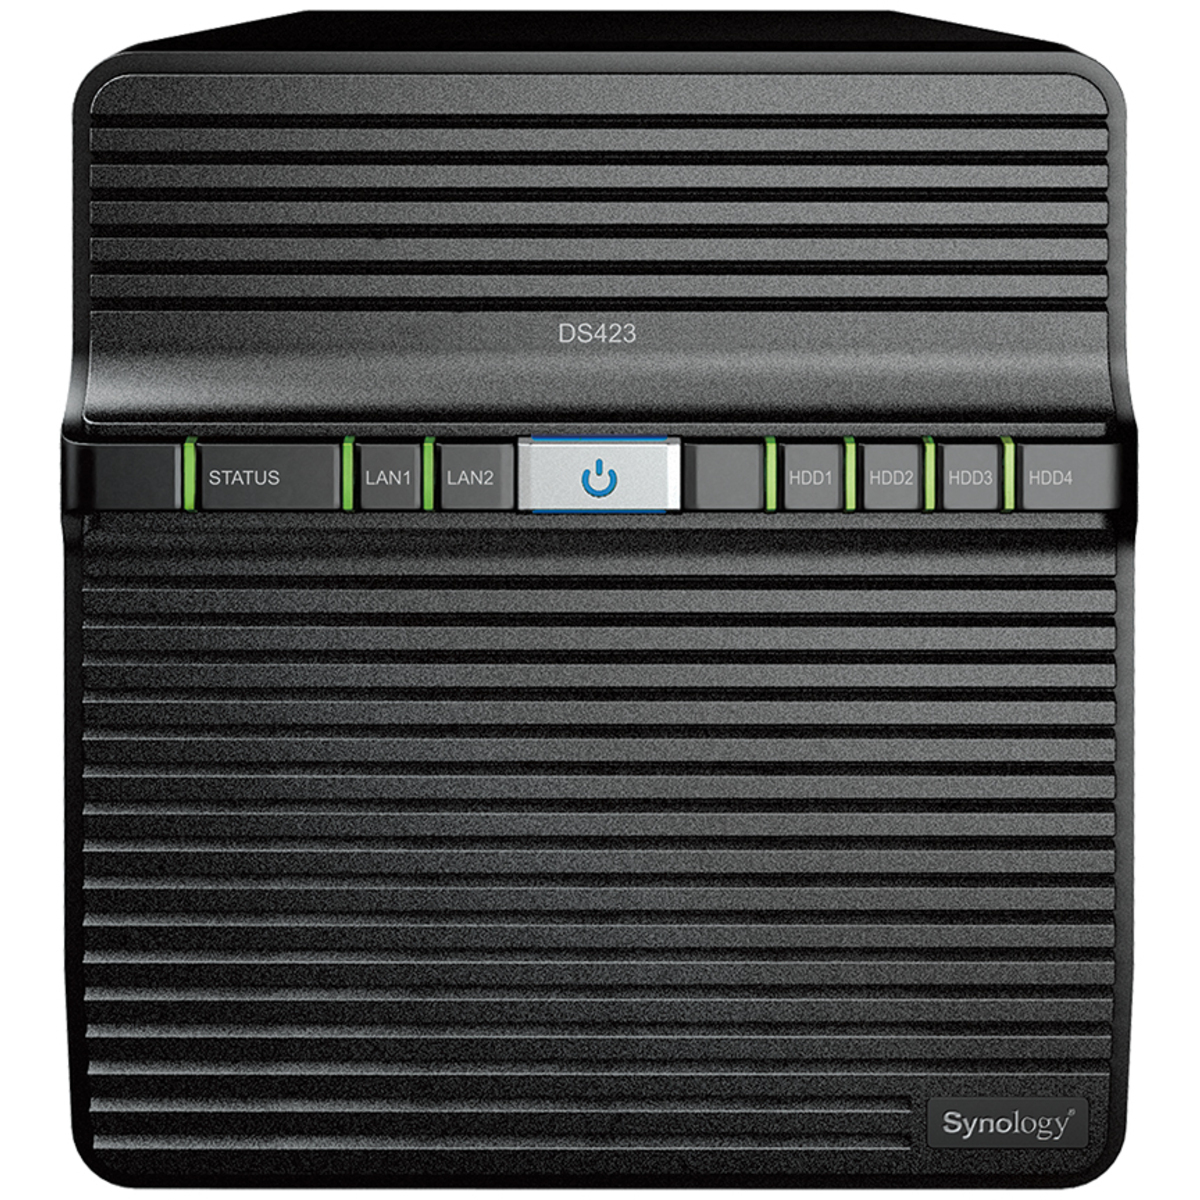 Synology DiskStation DS423 96tb 4-Bay Desktop Personal / Basic Home / Small Office NAS - Network Attached Storage Device 4x24tb Seagate IronWolf Pro ST24000NT002 3.5 7200rpm SATA 6Gb/s HDD NAS Class Drives Installed - Burn-In Tested DiskStation DS423